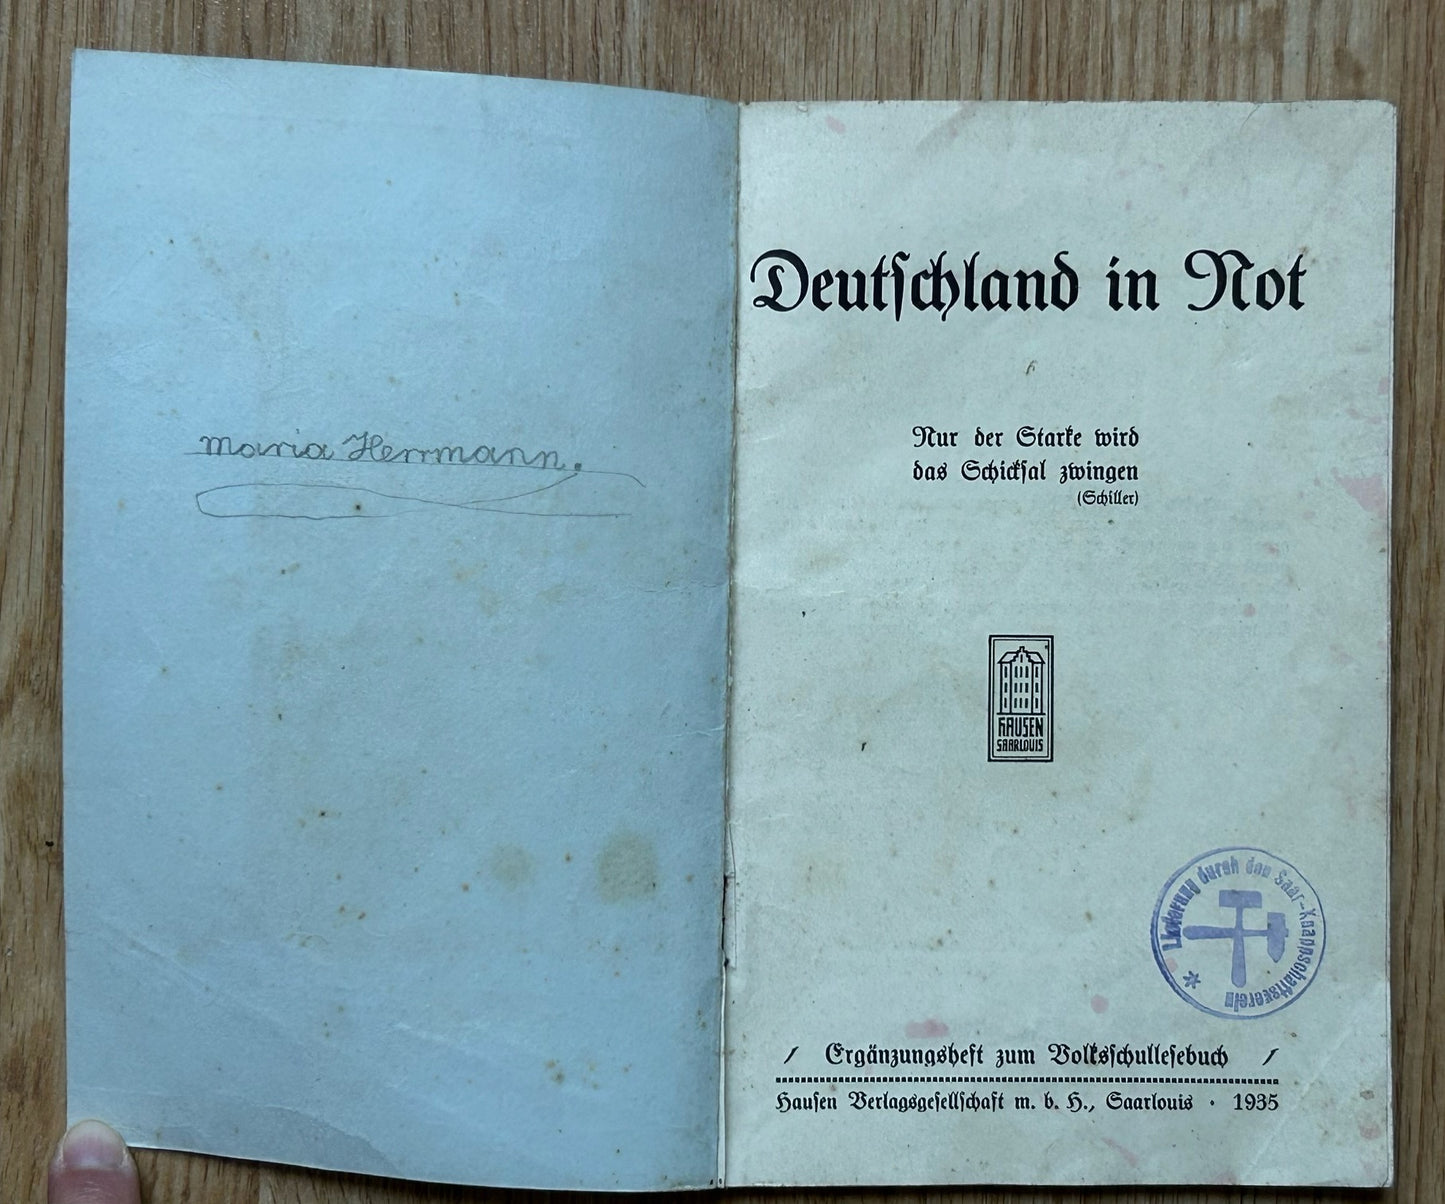 Deutschland in Not - 1935 book of speeches and quotes